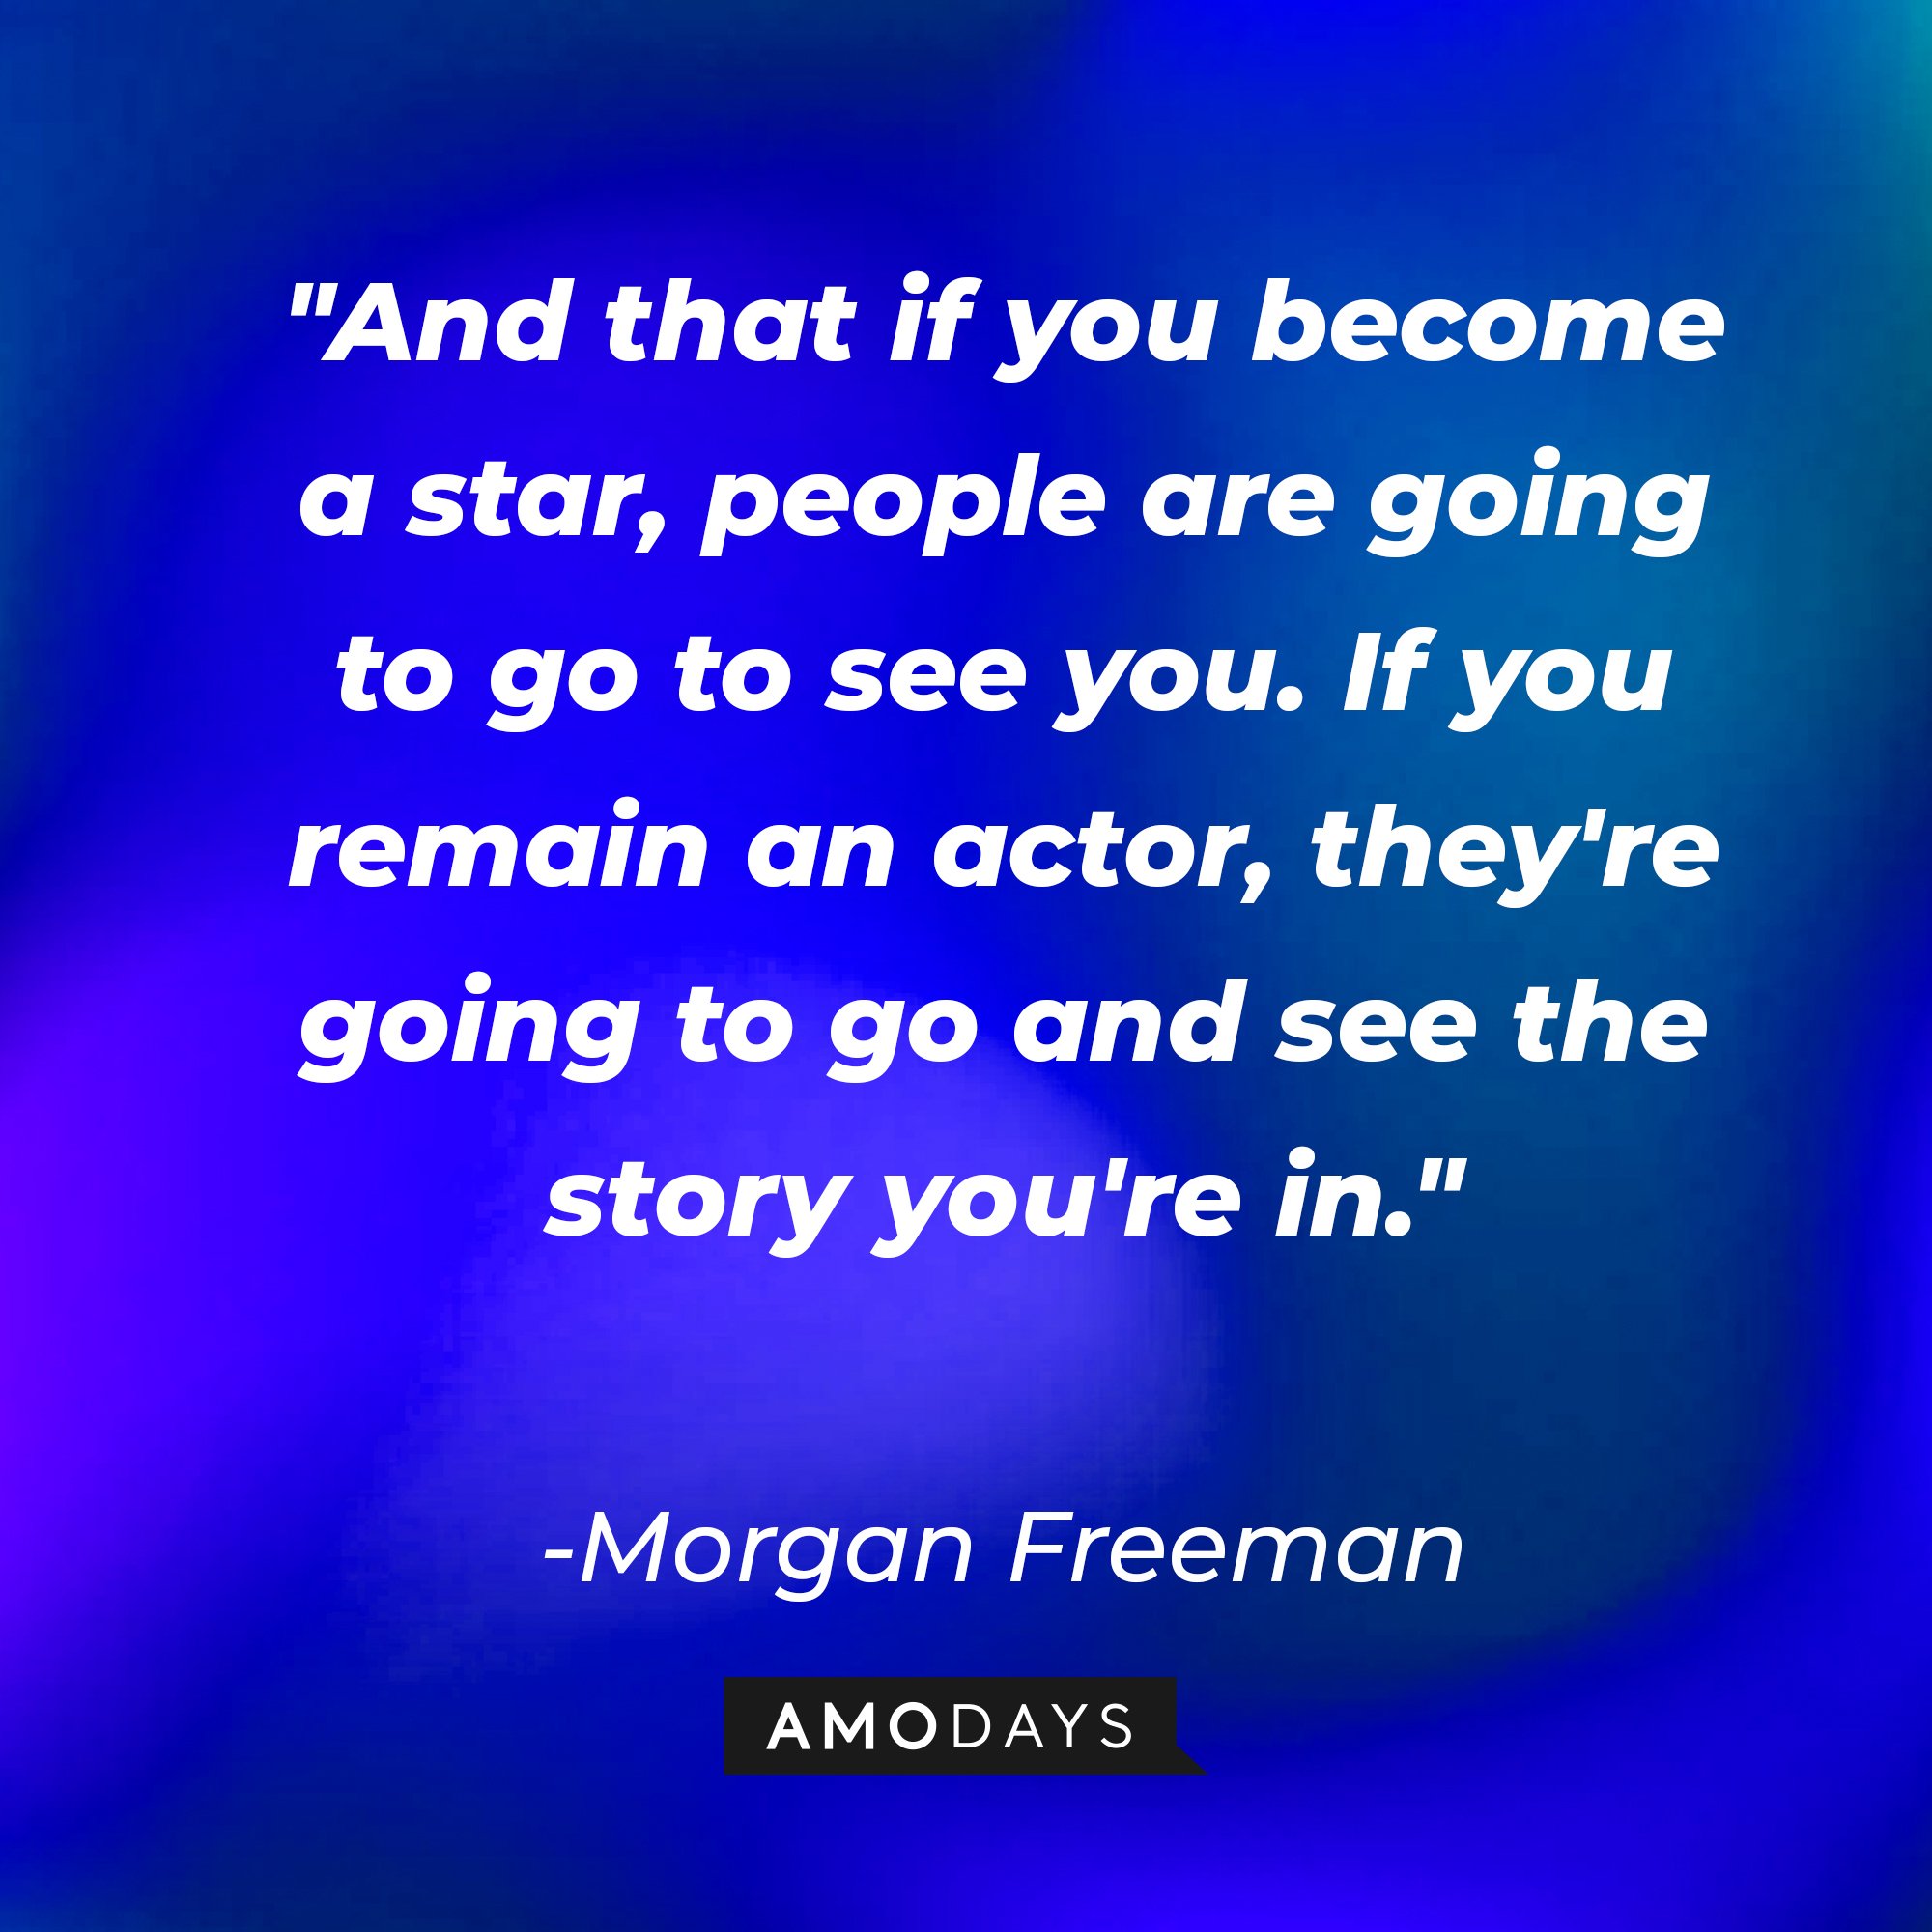   Morgan Freeman’s quote: "And that if you become a star, people are going to go to see you. If you remain an actor, they're going to go and see the story you're in." | Image: AmoDays